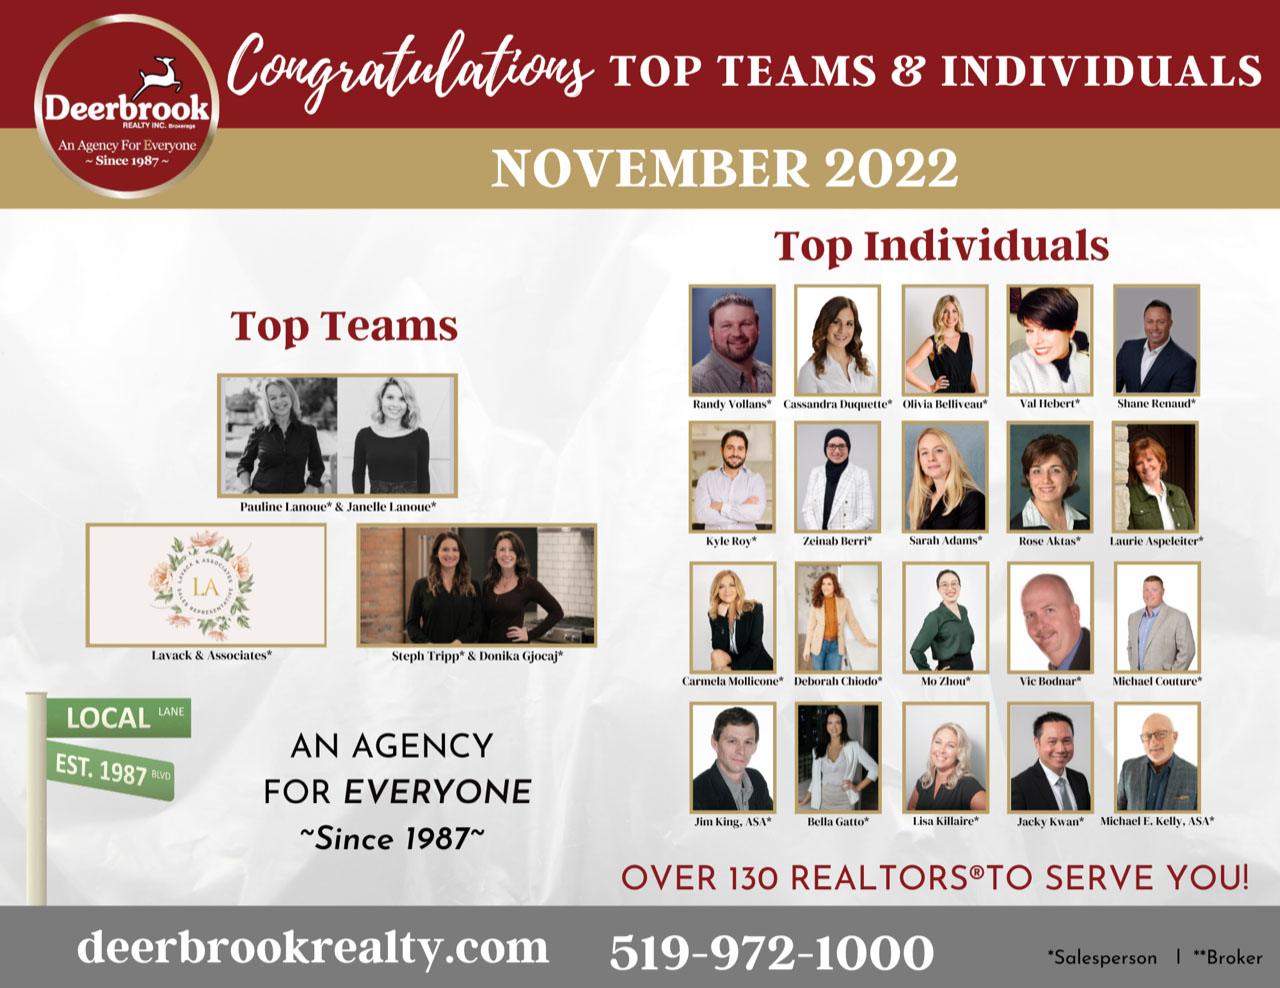 We Are Proud to be Named a Top Team for November 2022